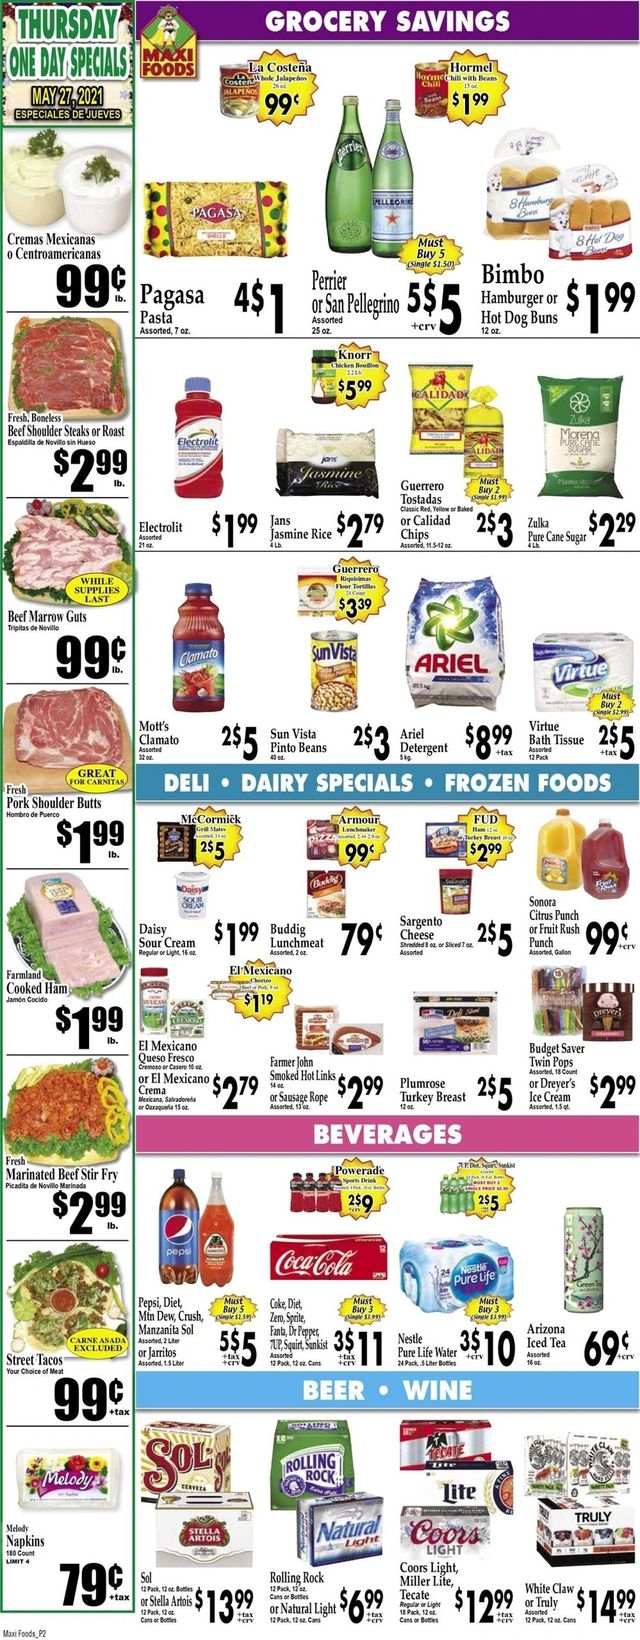 Maxi Foods Ad from 05/26/2021